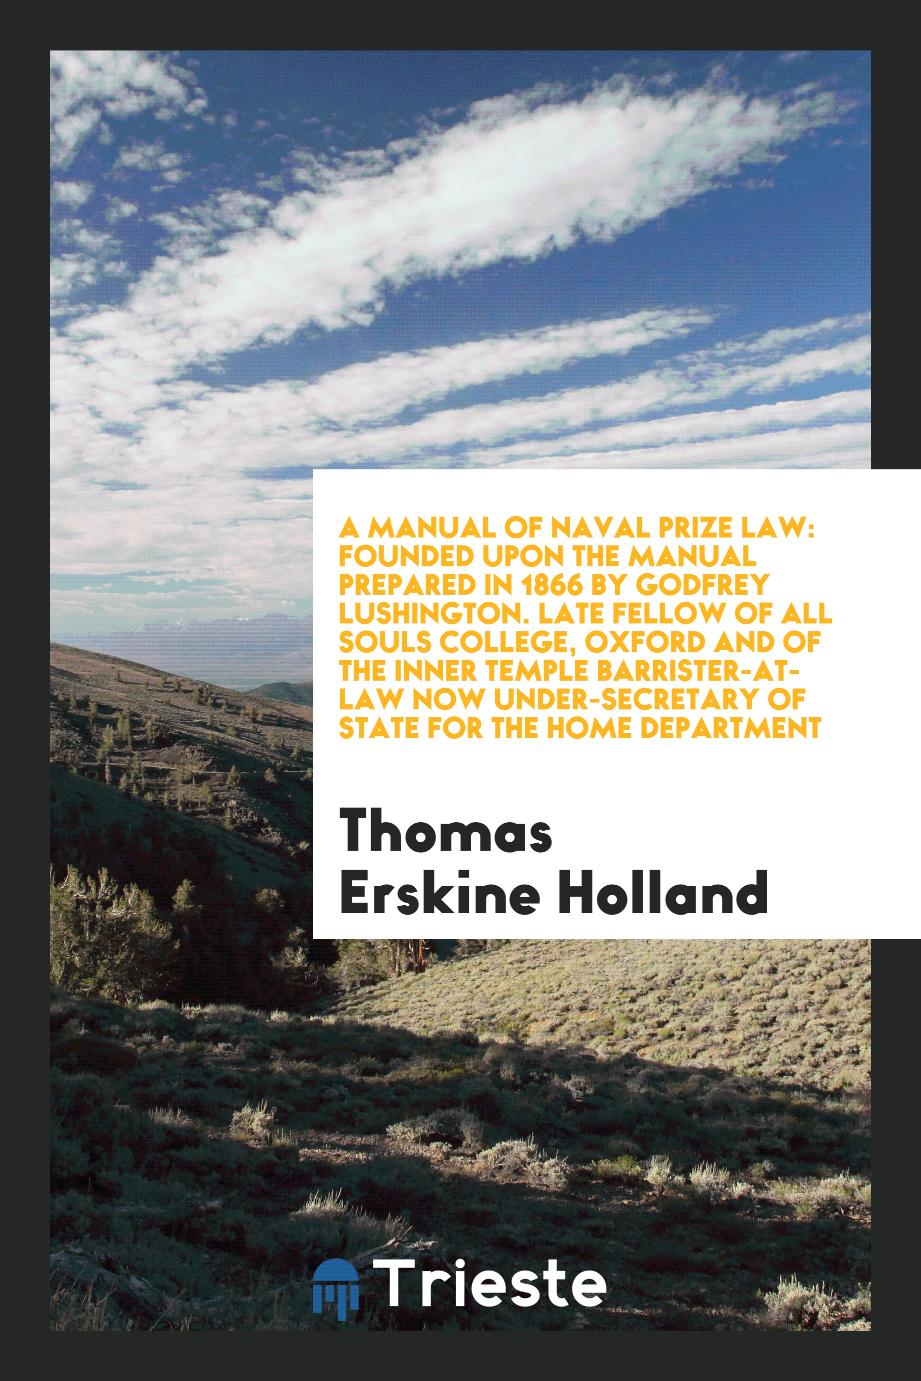 A Manual of Naval Prize Law: Founded upon the Manual Prepared in 1866 by Godfrey Lushington. Late Fellow of All Souls College, Oxford and of the Inner Temple Barrister-At-Law Now Under-Secretary of State for the Home Department